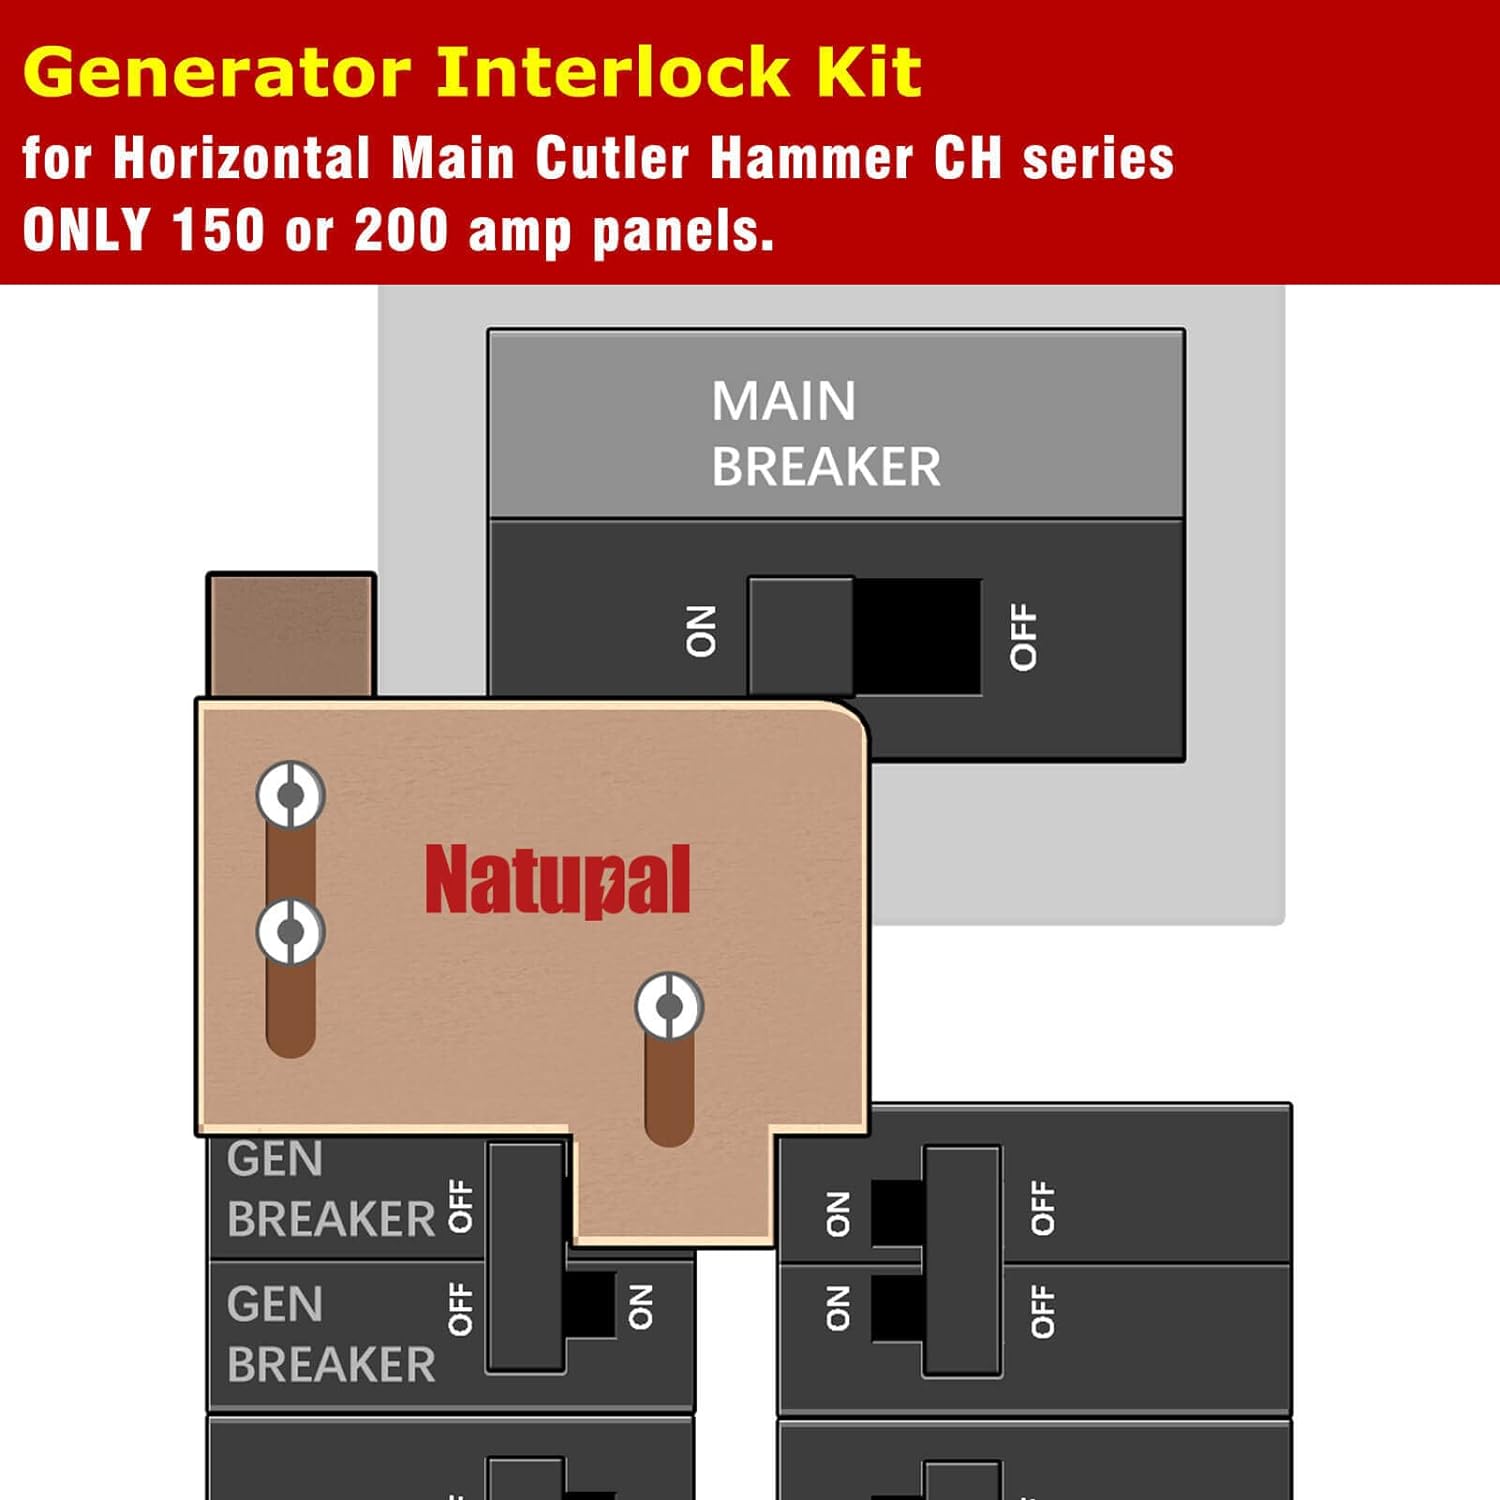 Natupal Generator Interlock Kit Compatible with Horizontal Main Cutler Hammer CH series ONLY 150 or 200 amp panels, TAN Breaker ONLY. 1